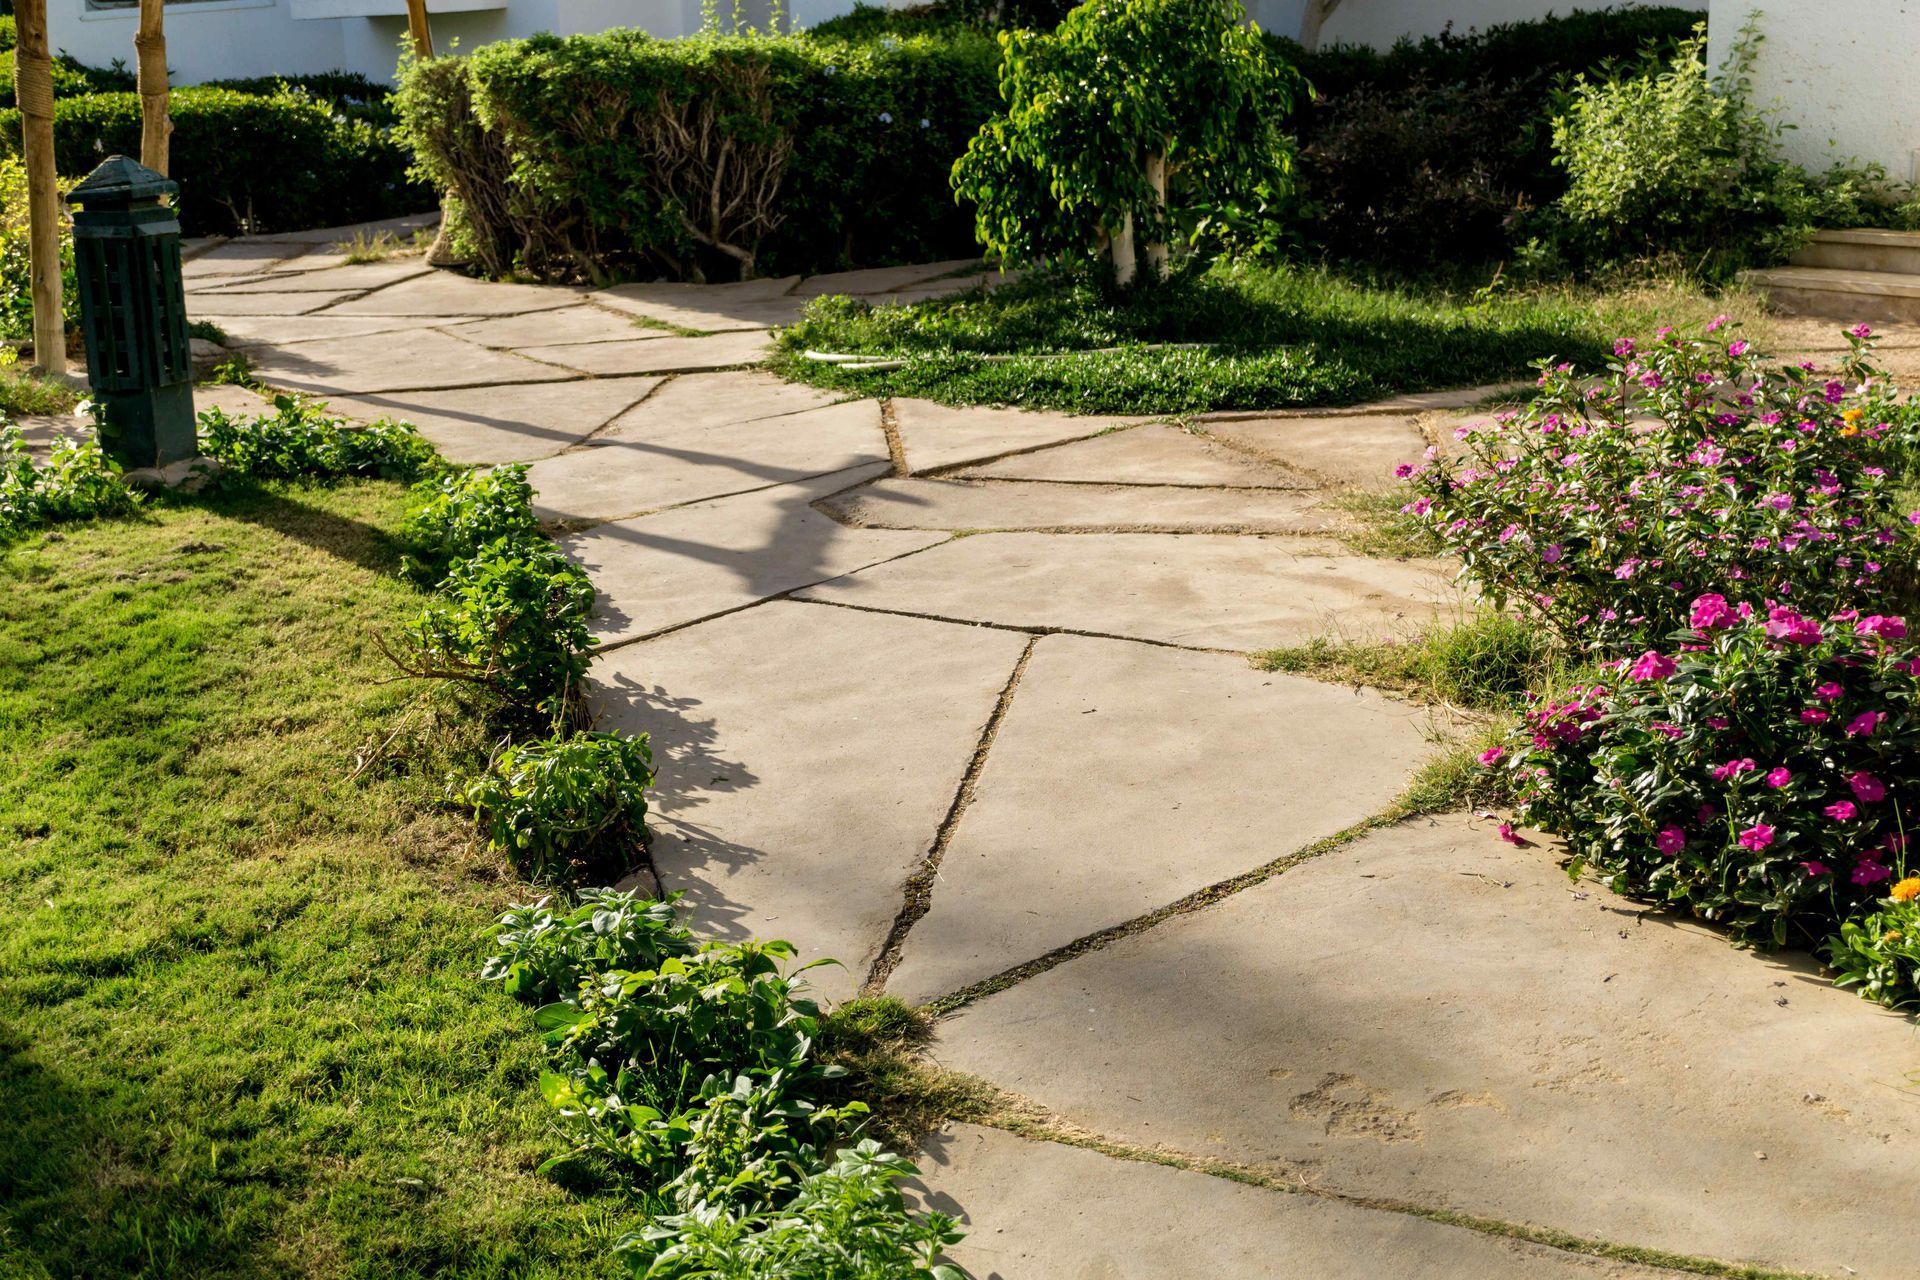 A complete paver pathway going by a garden